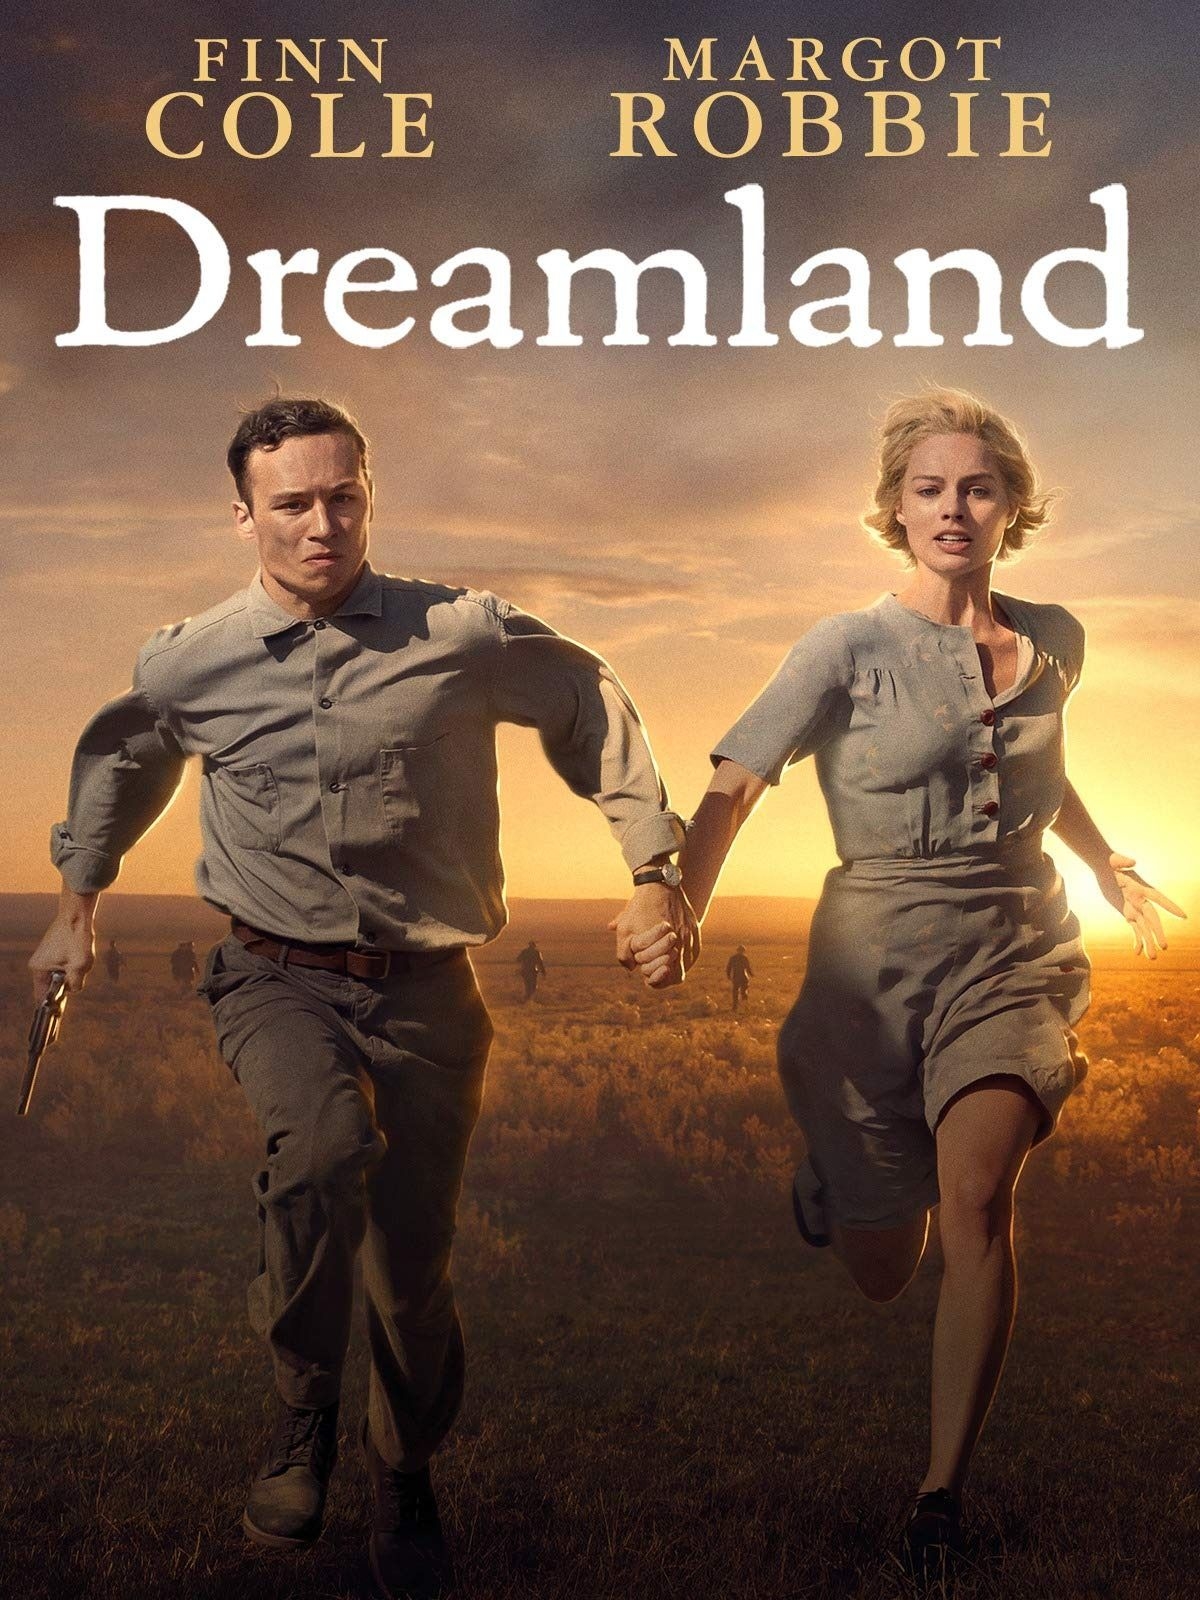 Watch Dreamland Online Streaming for free